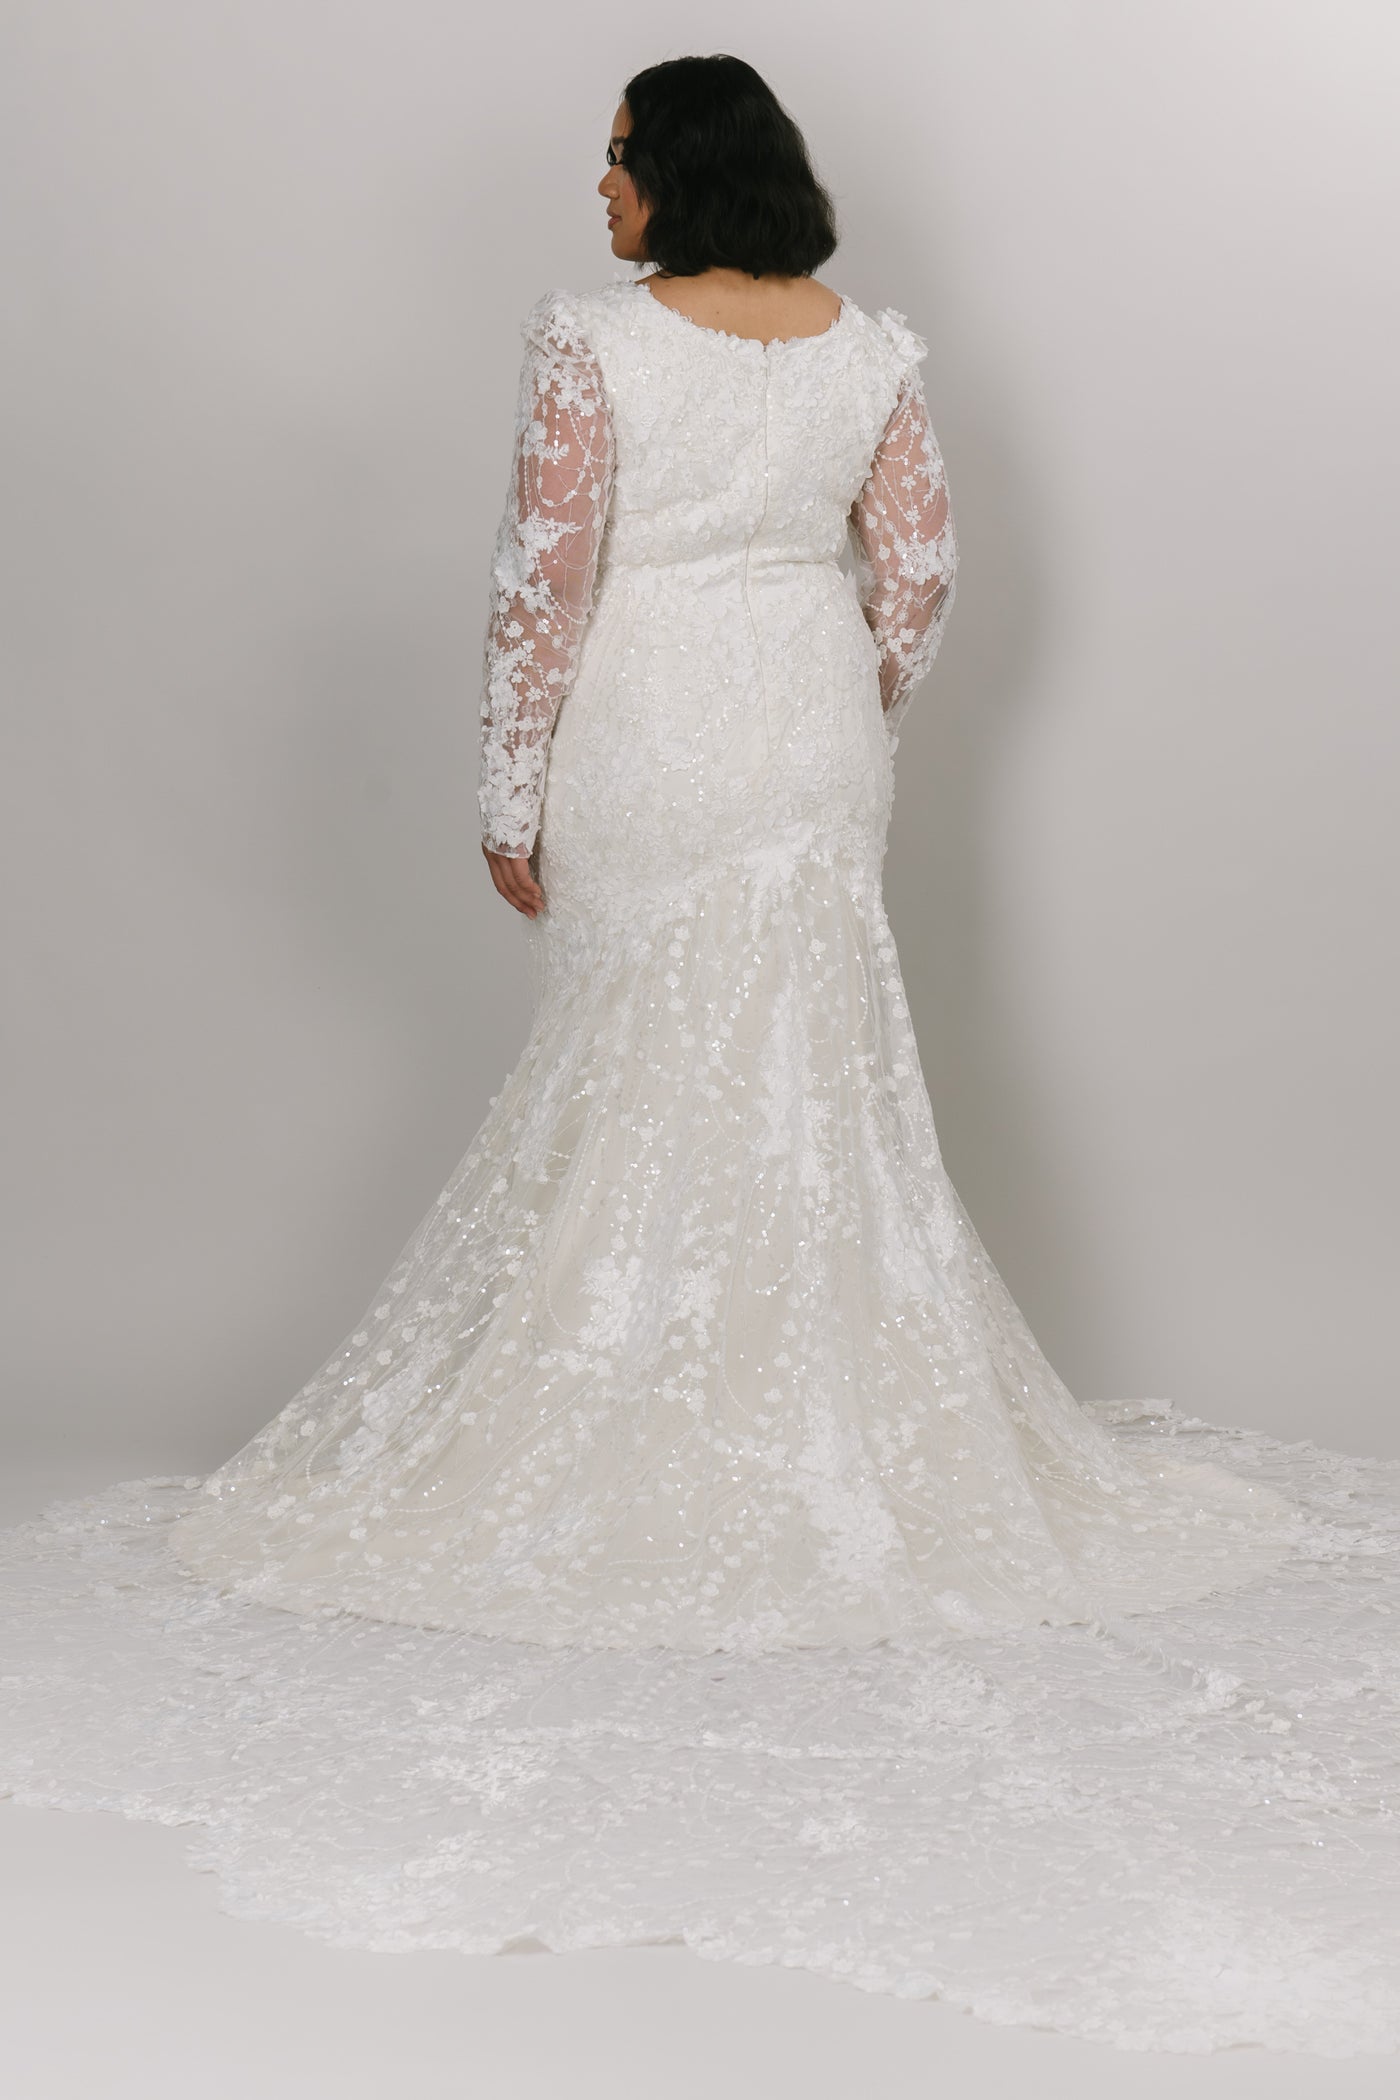 Back view of beautiful lace modest wedding dress by Moments Made Bridal. It has a v-neckline with a long lace sleeves. The sleeves have a slight puff at the top of the sleeve. It is a fitted fit with a long gorgeous train.